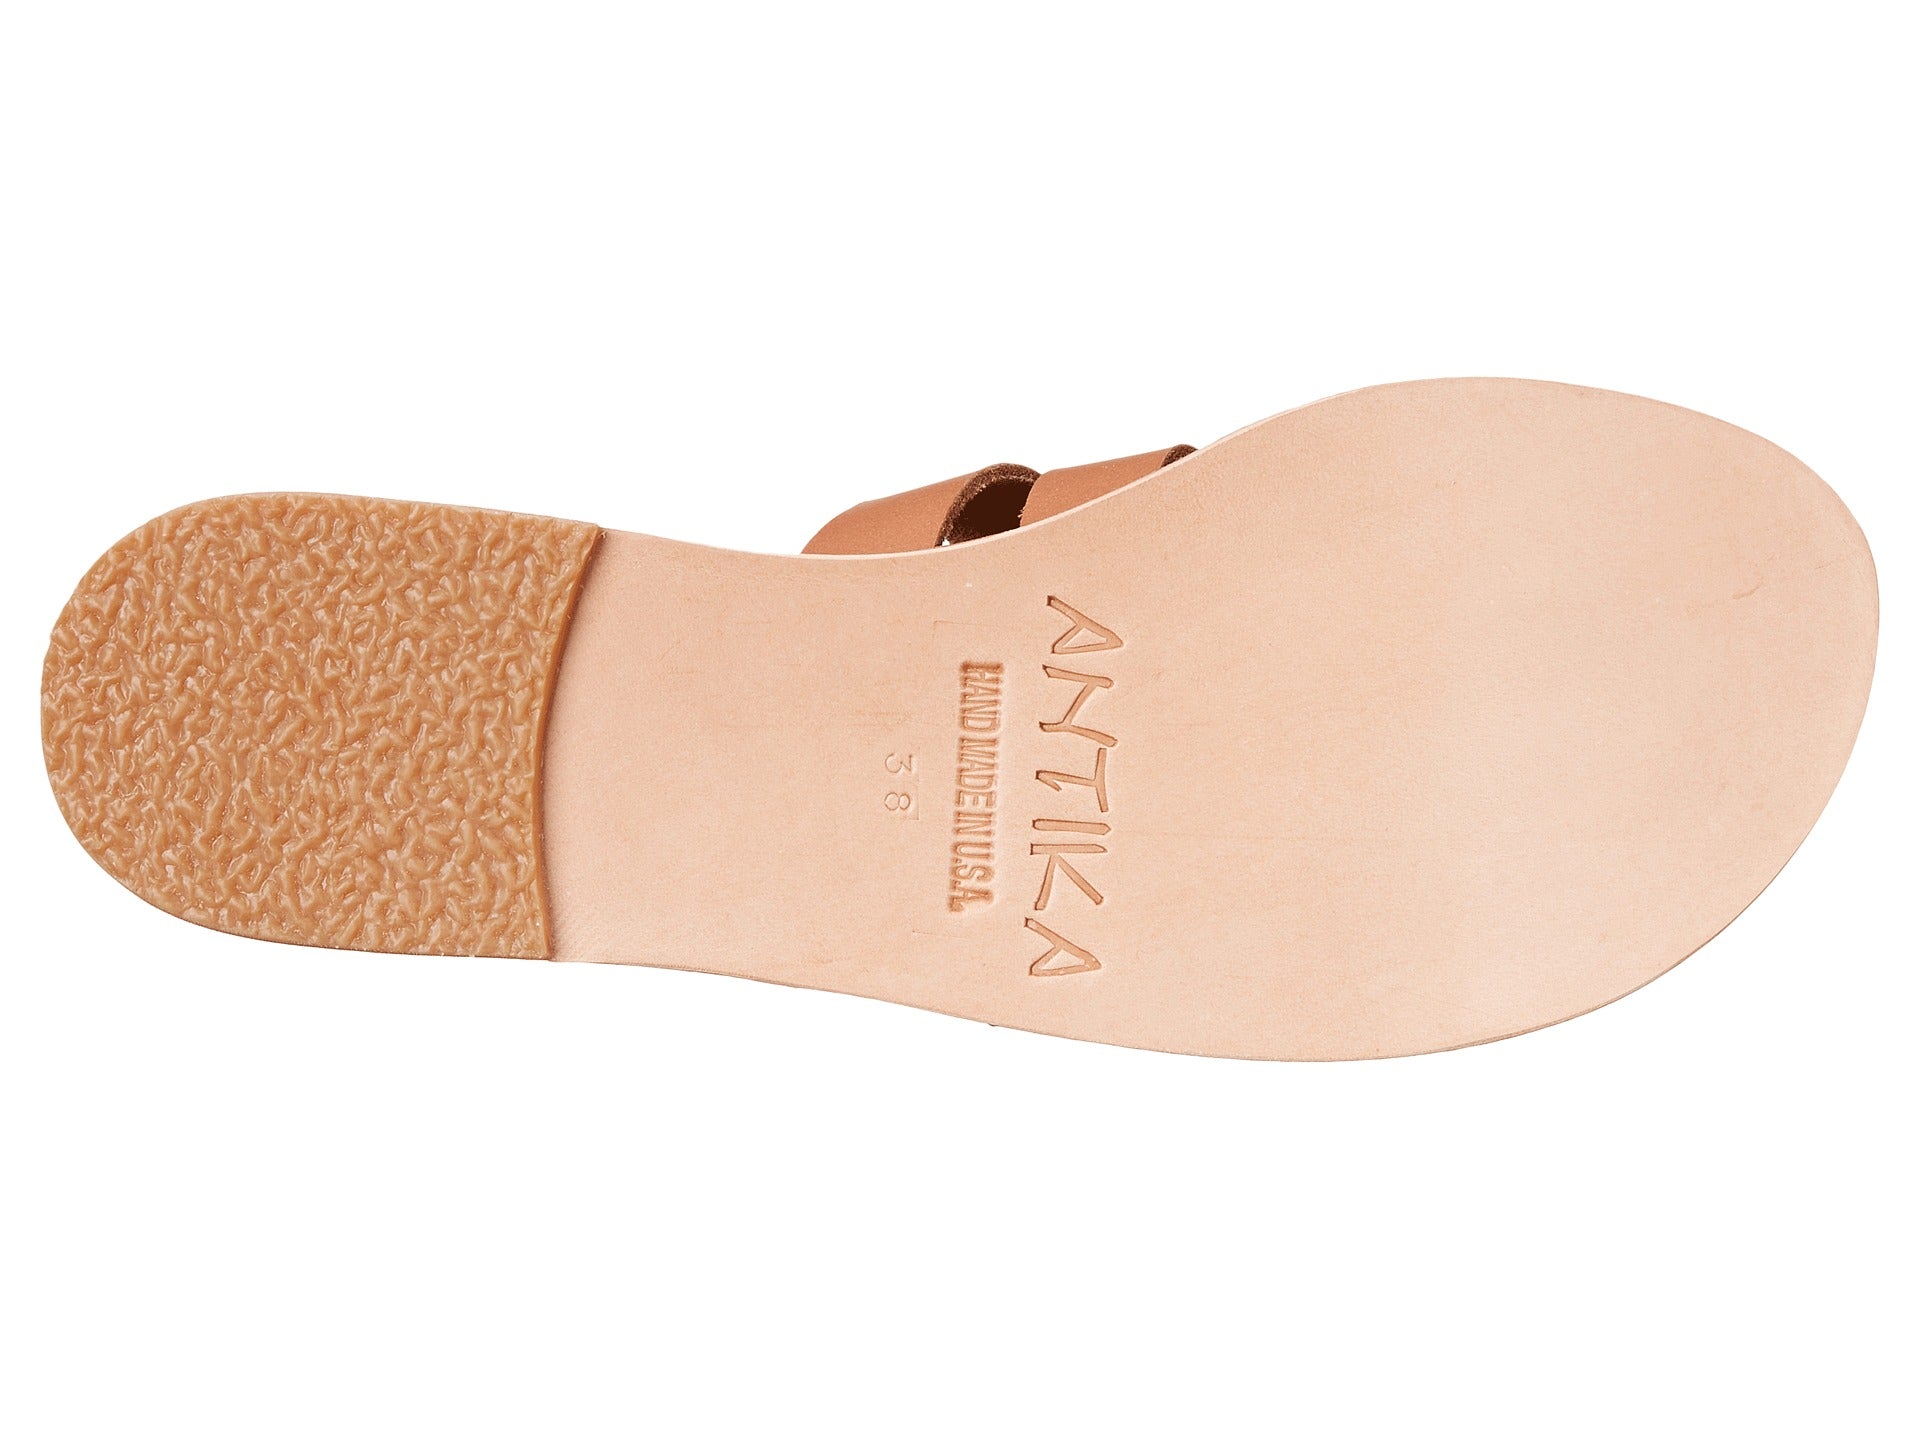 Santa Monica Blvd tan, handmade leather sandals with anklet strap and buckle  - sole View